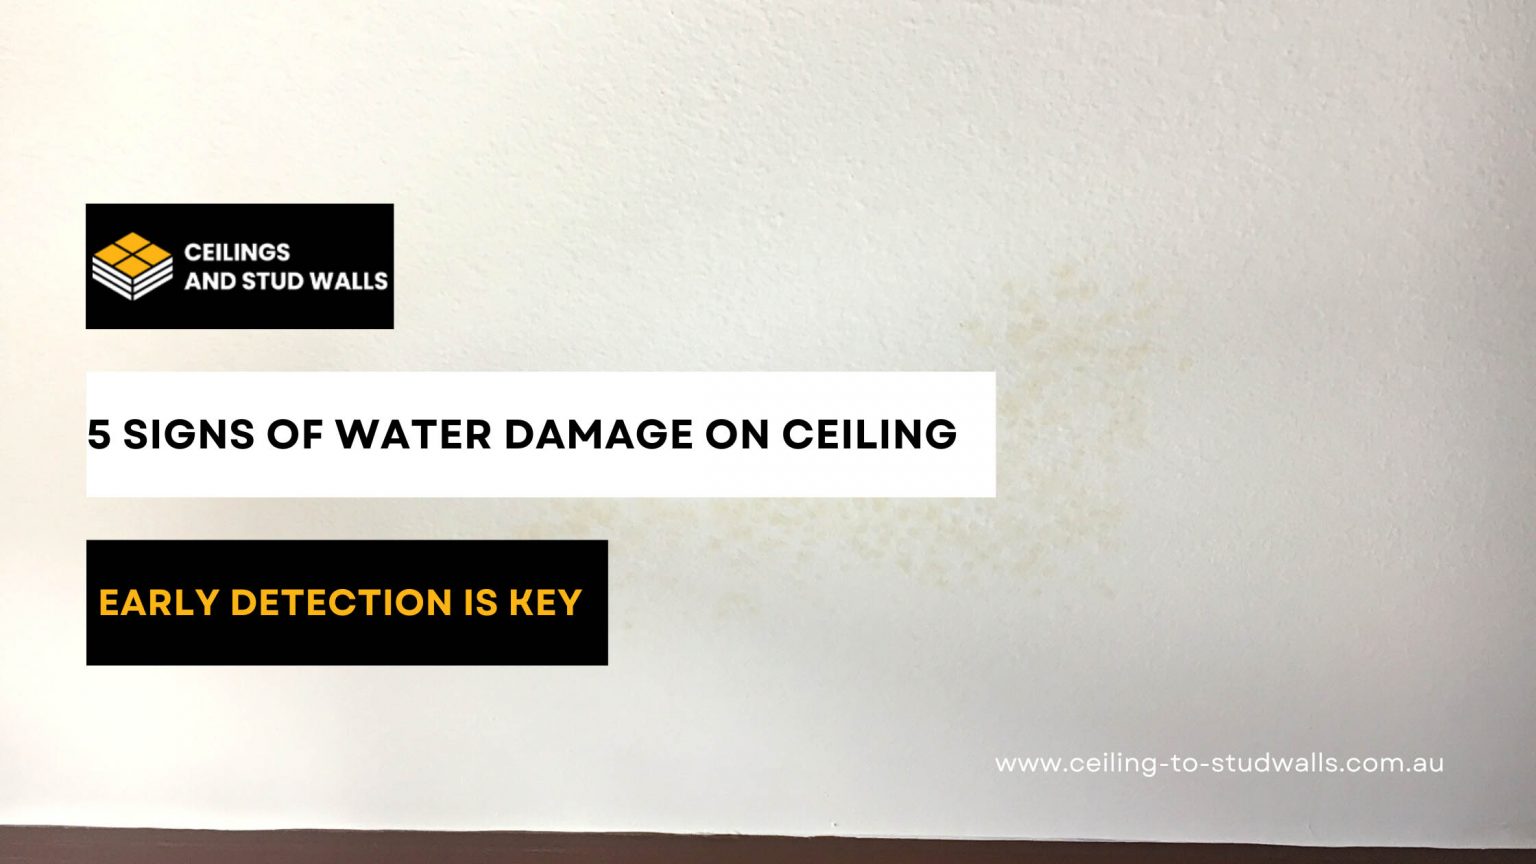 Signs Of Water Damage On Ceiling Ceilings And Stud Walls